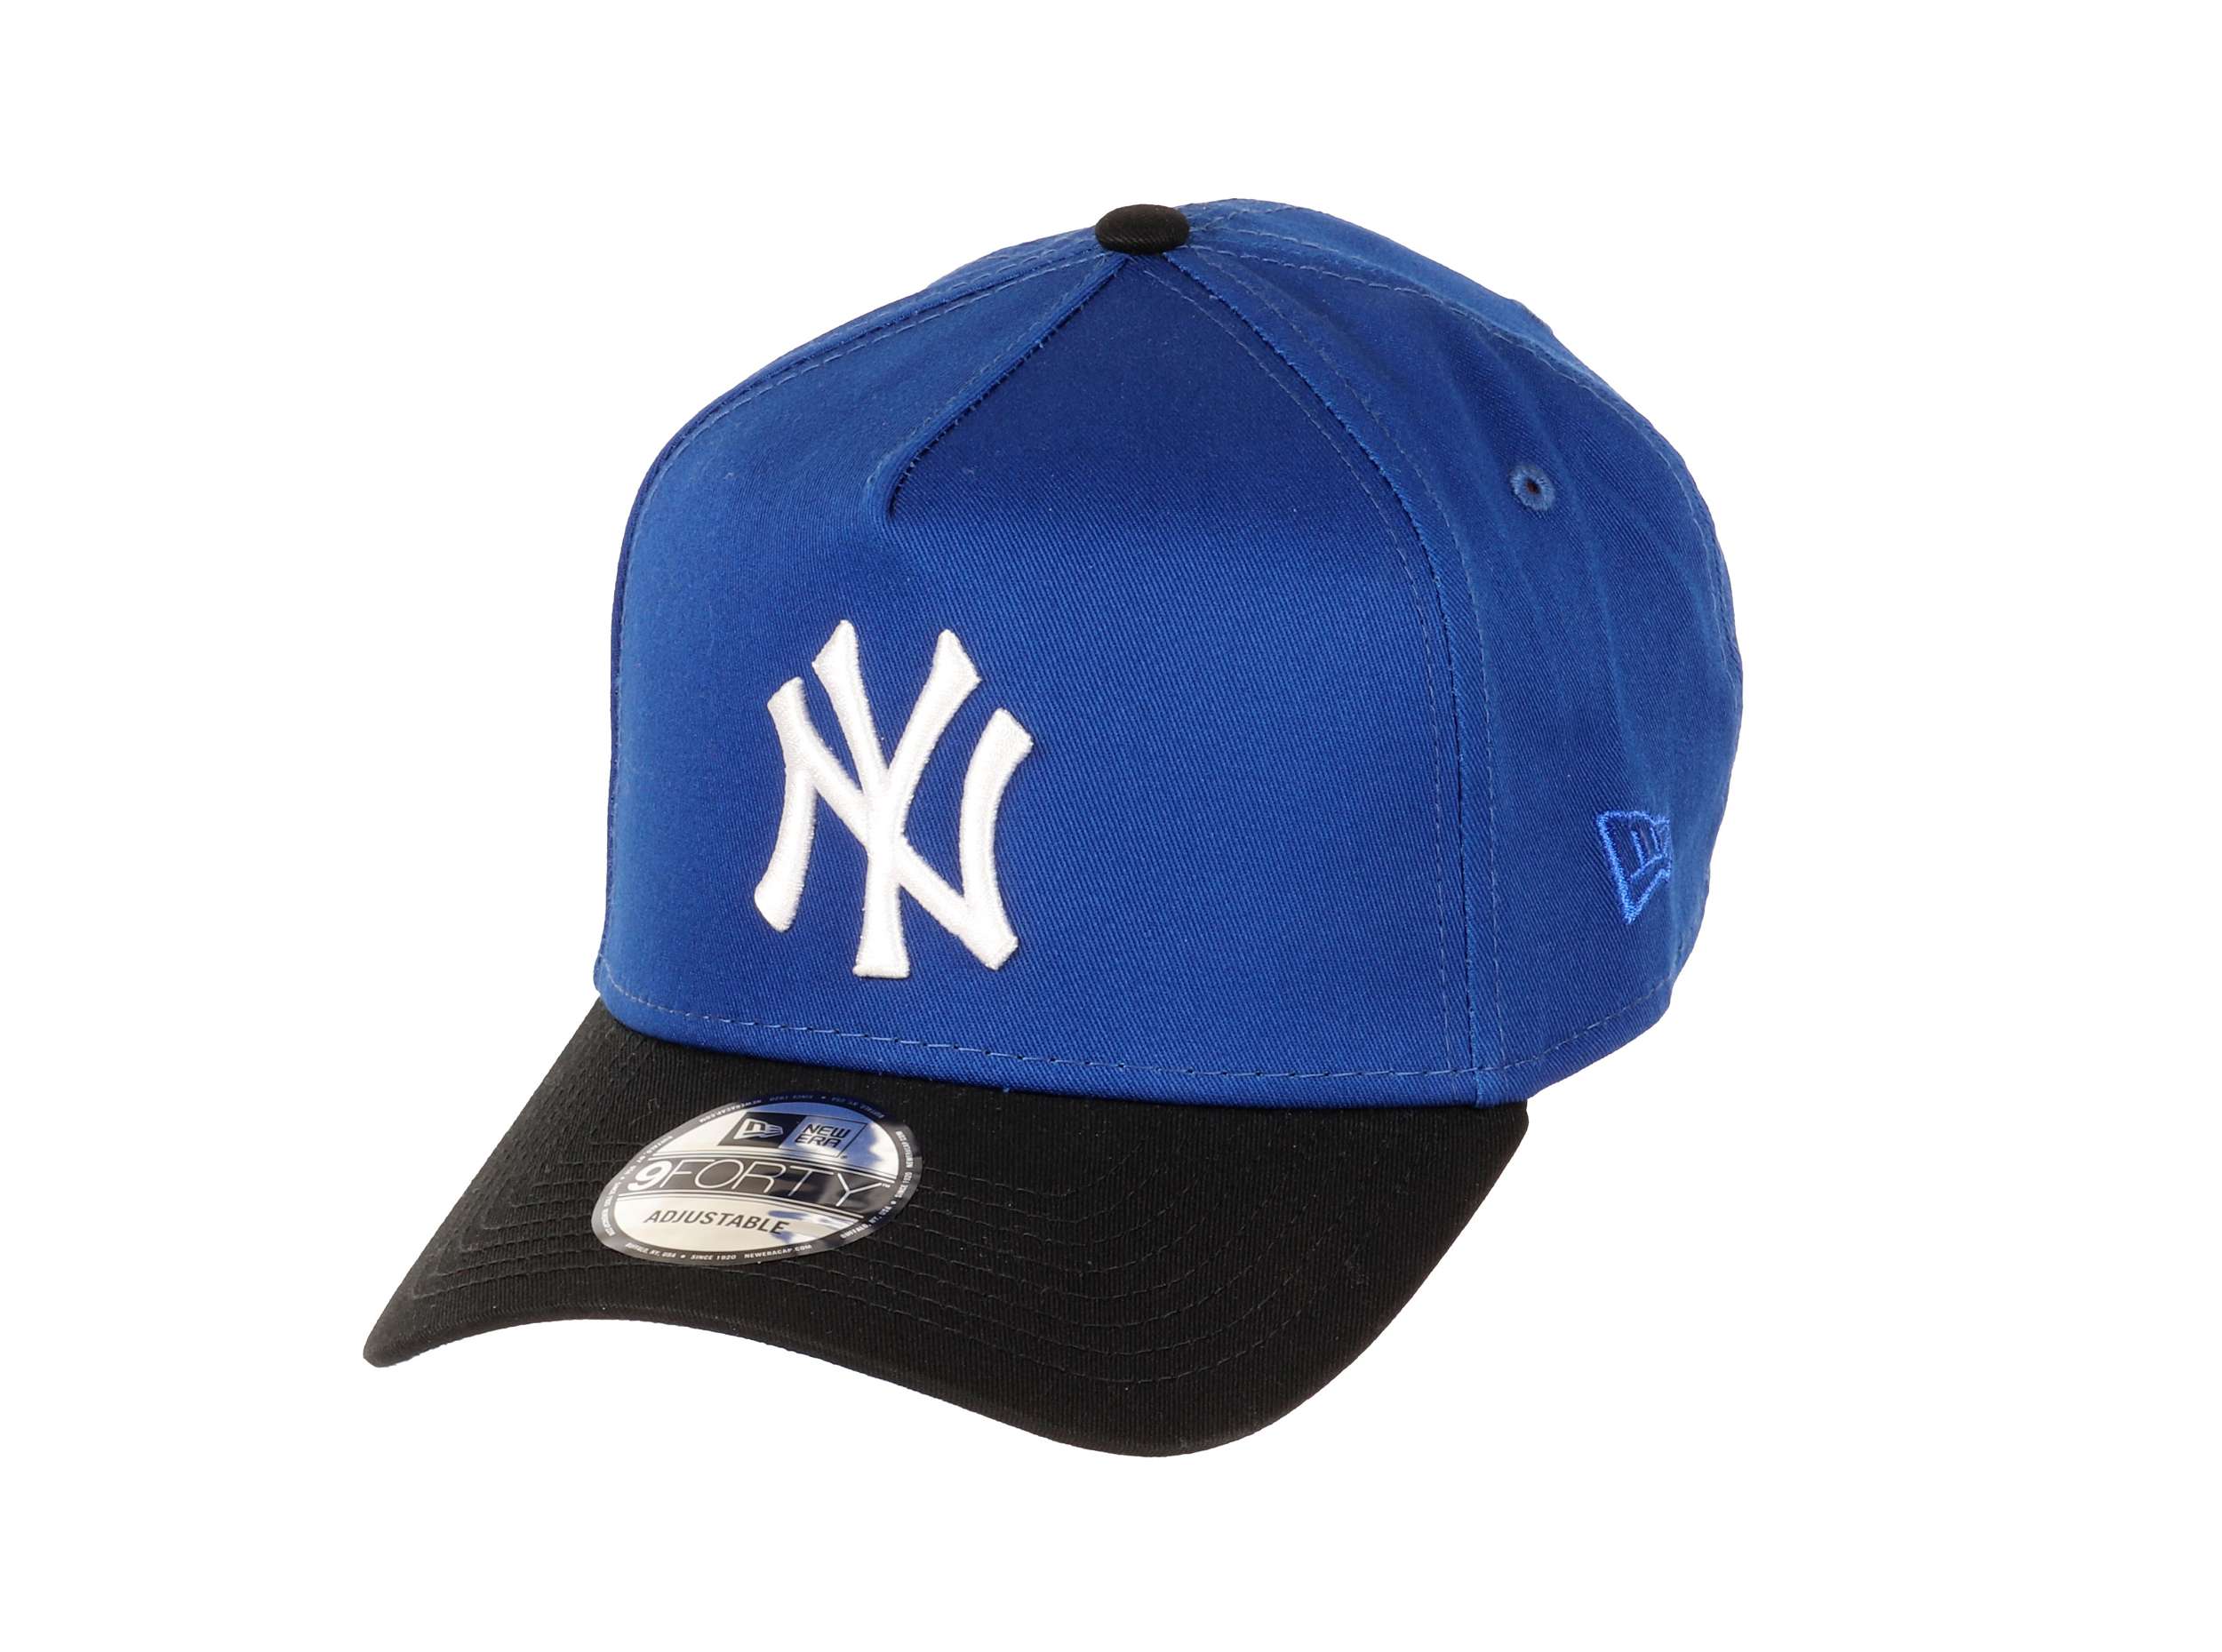 New York Yankees MLB World Series 1998 Sidepatch Cooperstown Royal Blue Sky 9Forty A-Frame Snapback Cap New Era